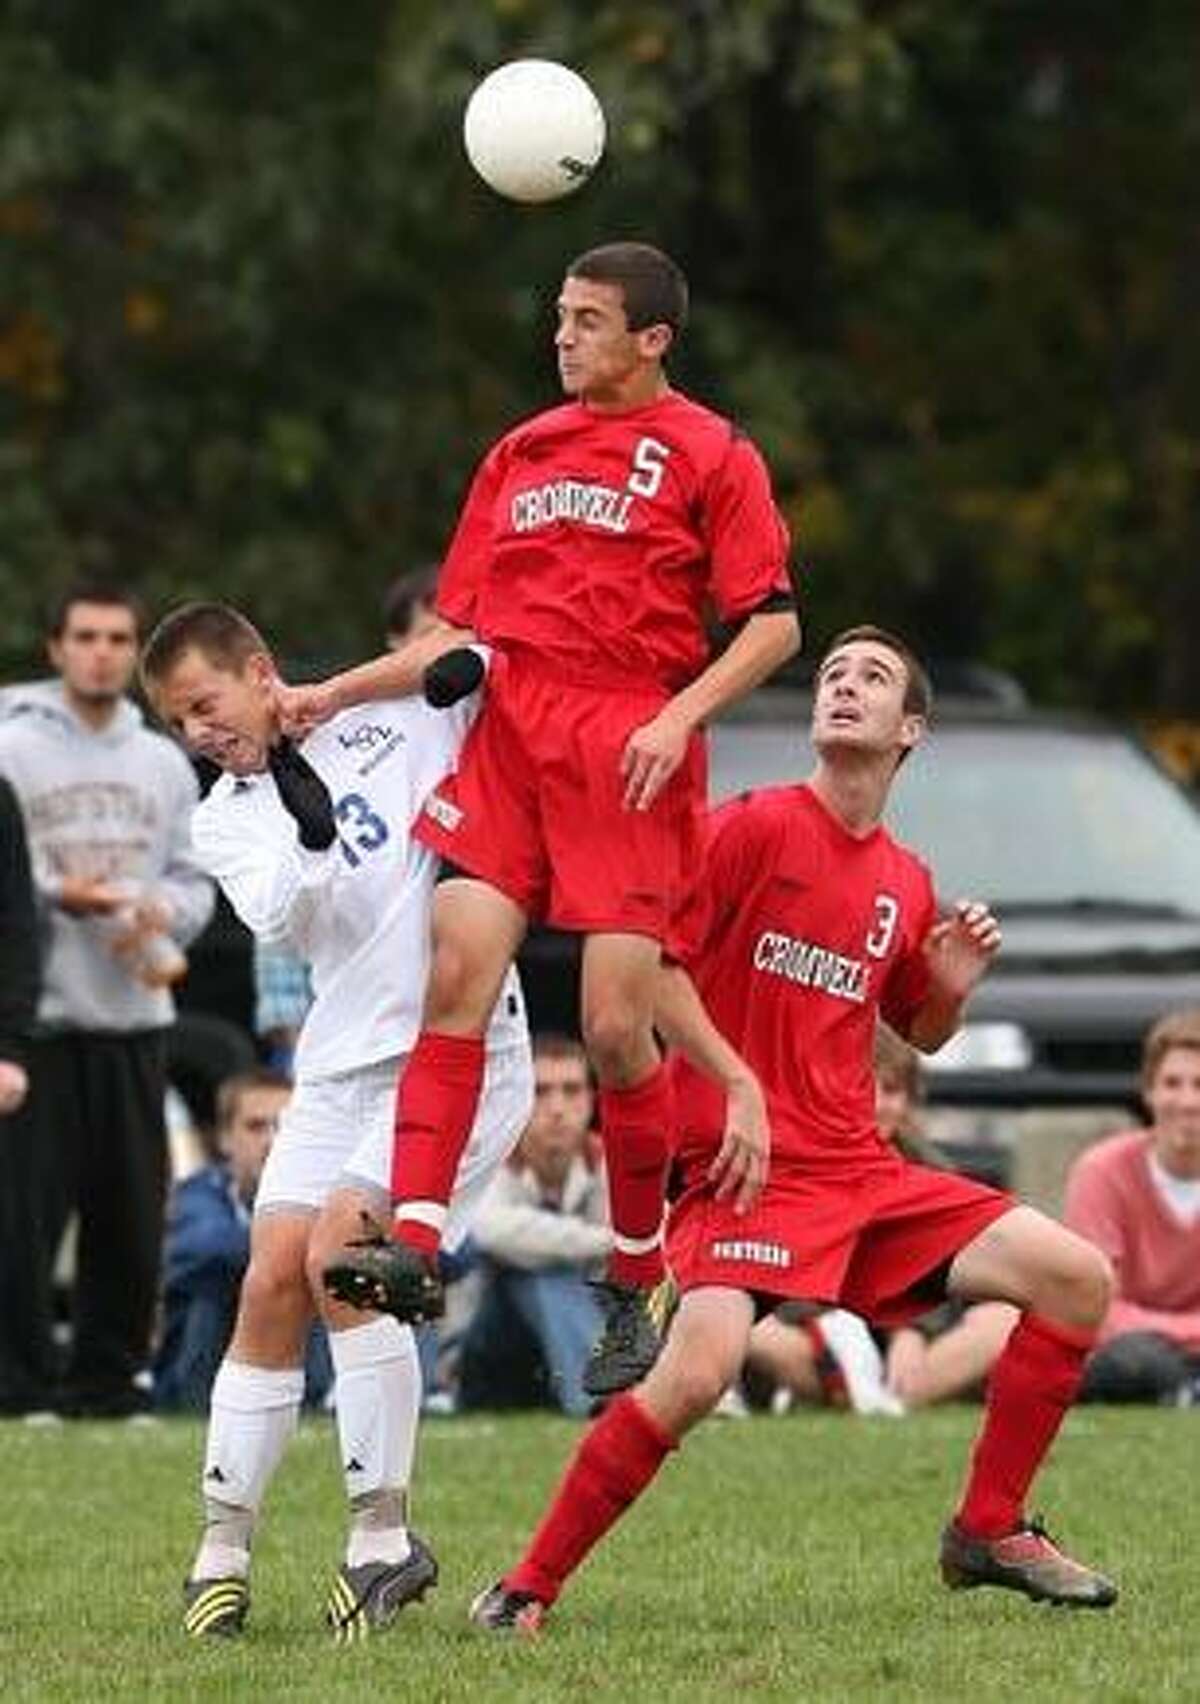 Cromwell's James Iannicelli out-jumps Old Lyme's Jeff Winters to head the ball Thursday. (Todd Kalif